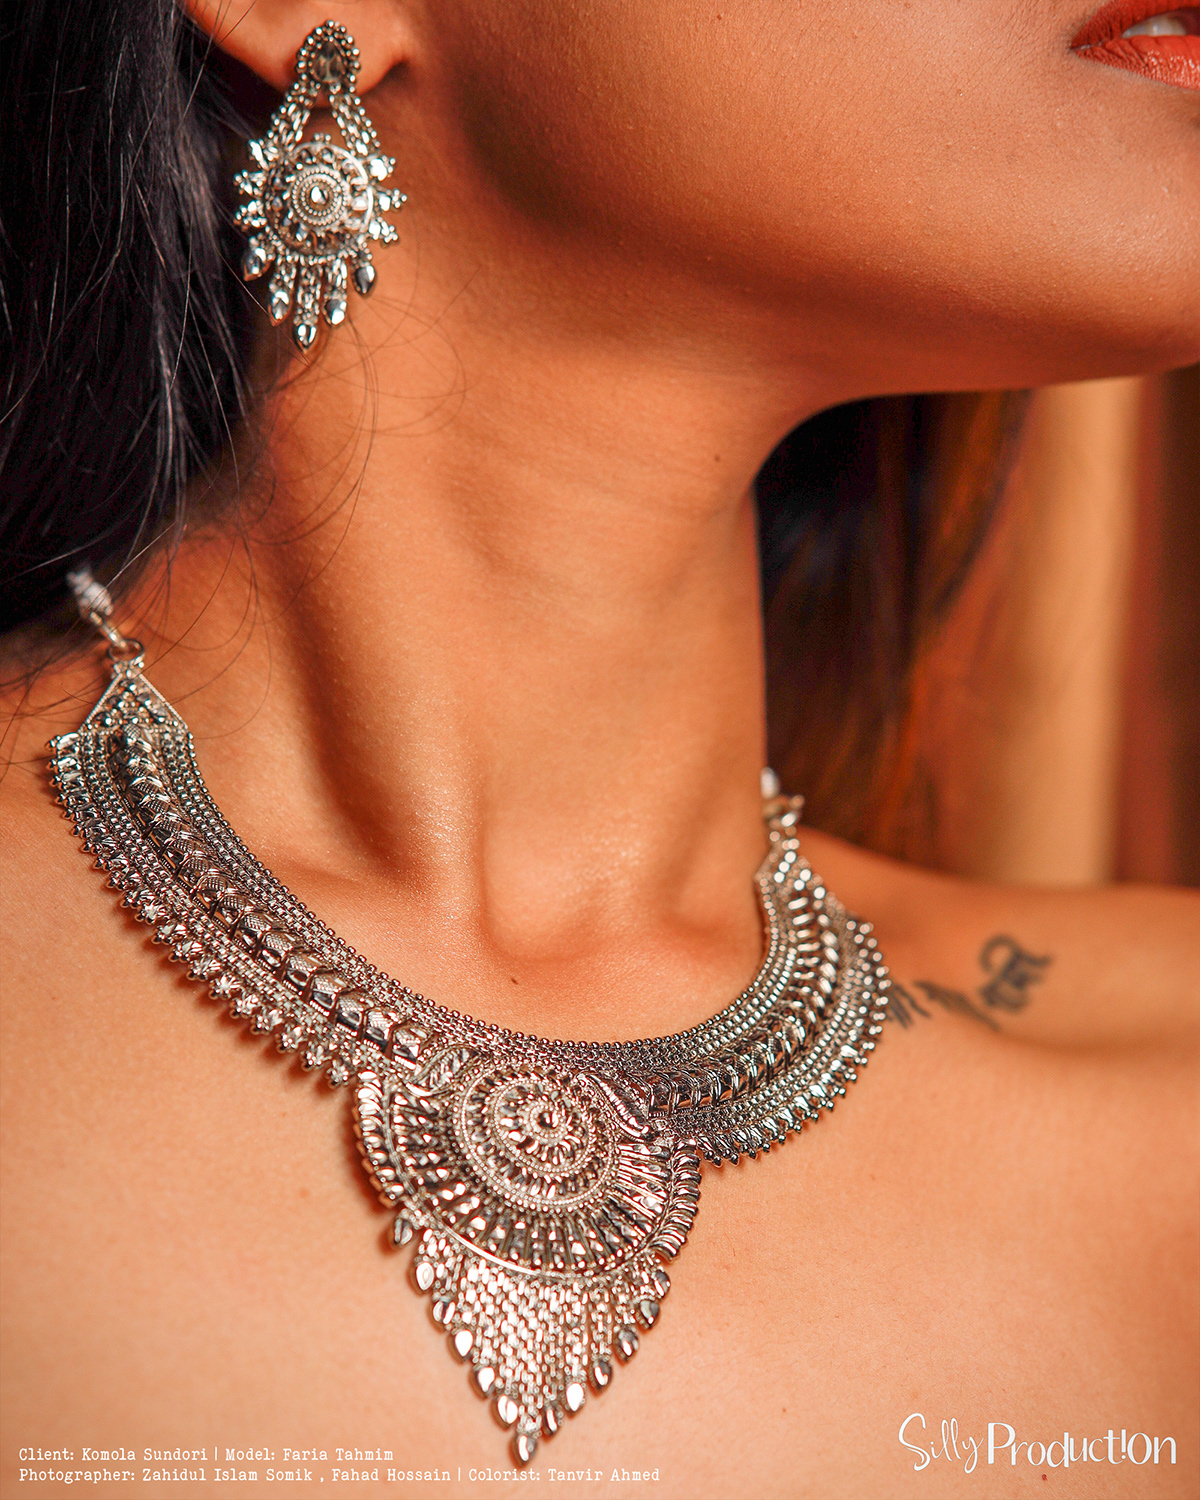 fashion accessory Photography  model neckless photoshoot beauty jwellery photography